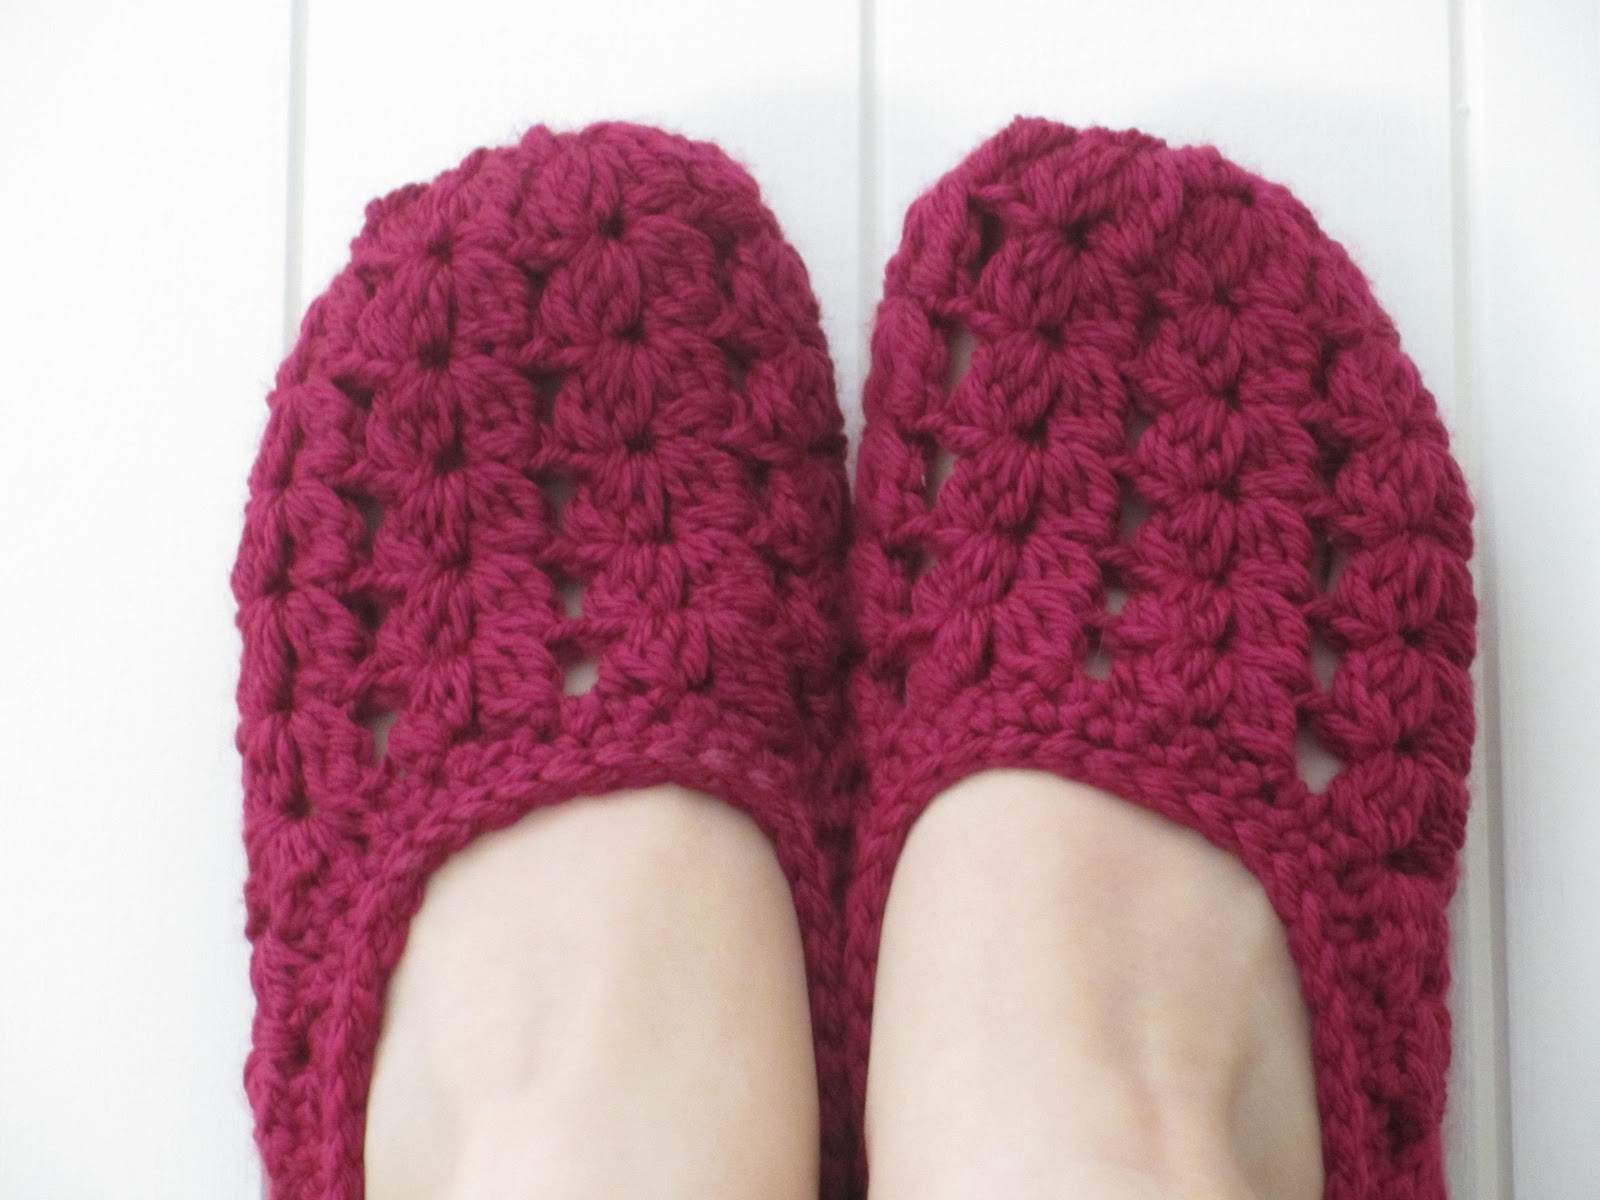 20 Free Crochet Slipper Patterns That Are Perfect For Fall - Ideal Me